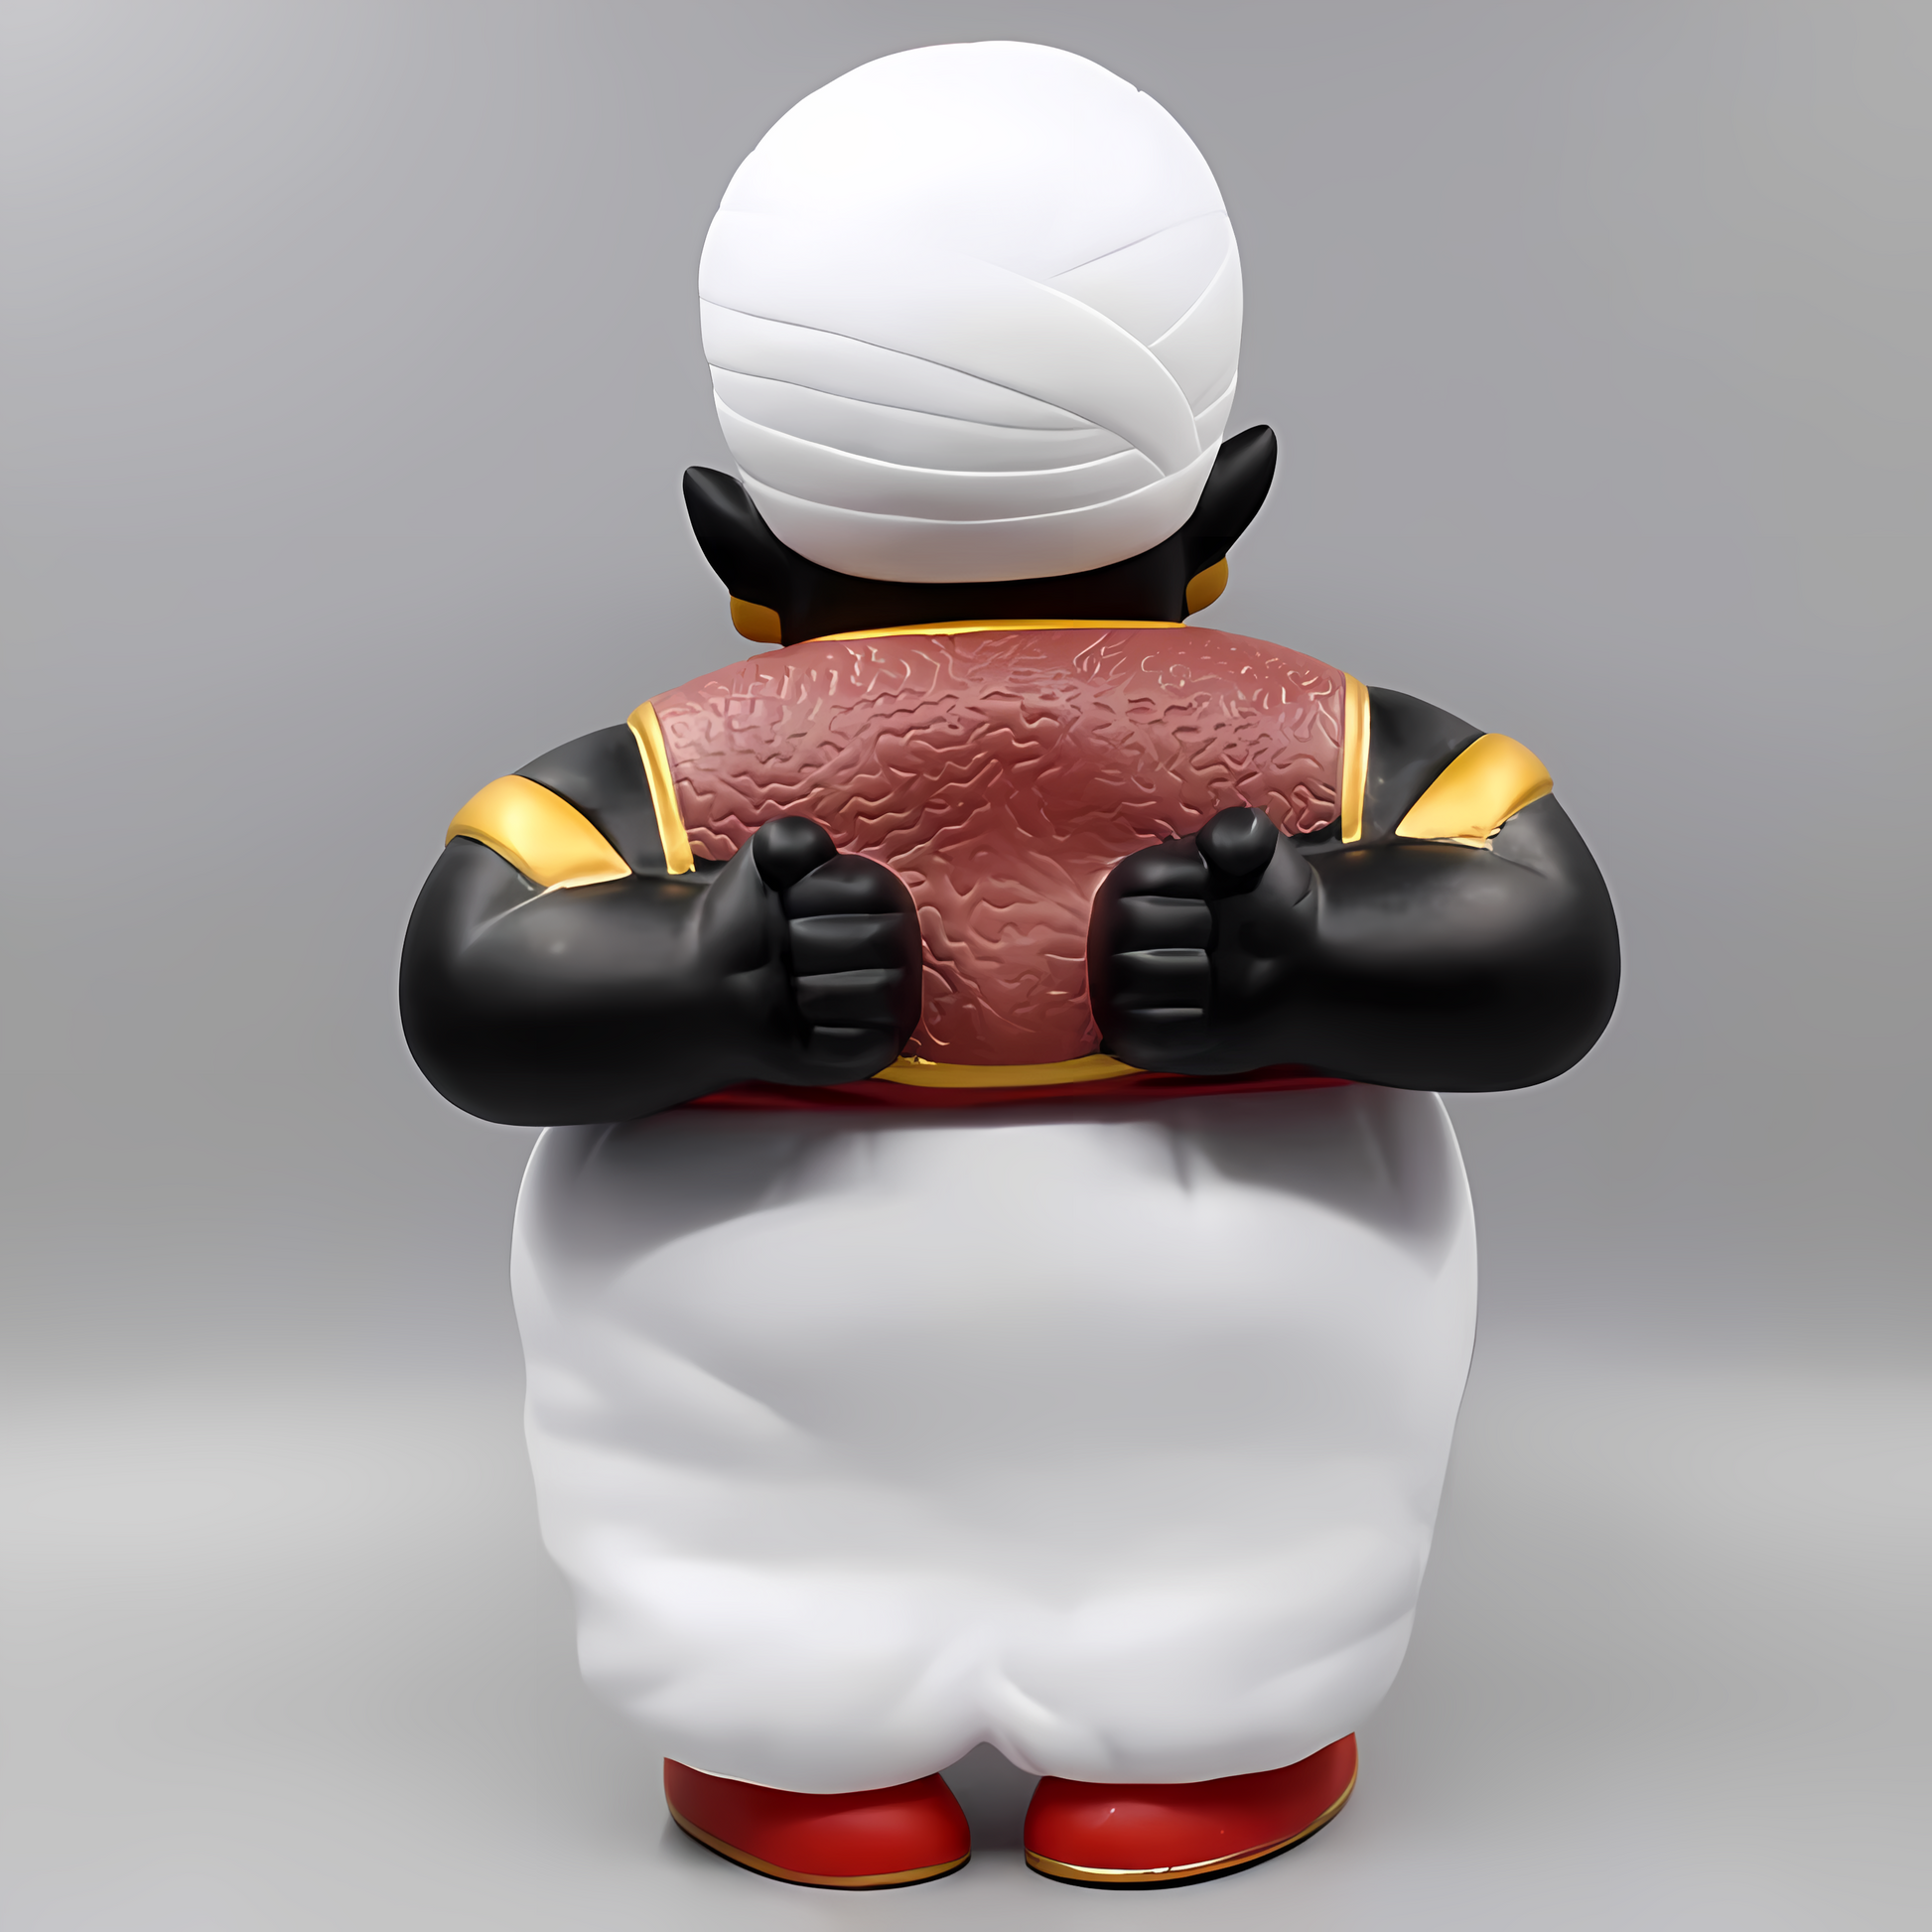 Rear view of the 'Mystical Guardian Popo' collectible figure from Dragon Ball, showcasing the intricate designs on the back of the red sash and golden shoulder armor.